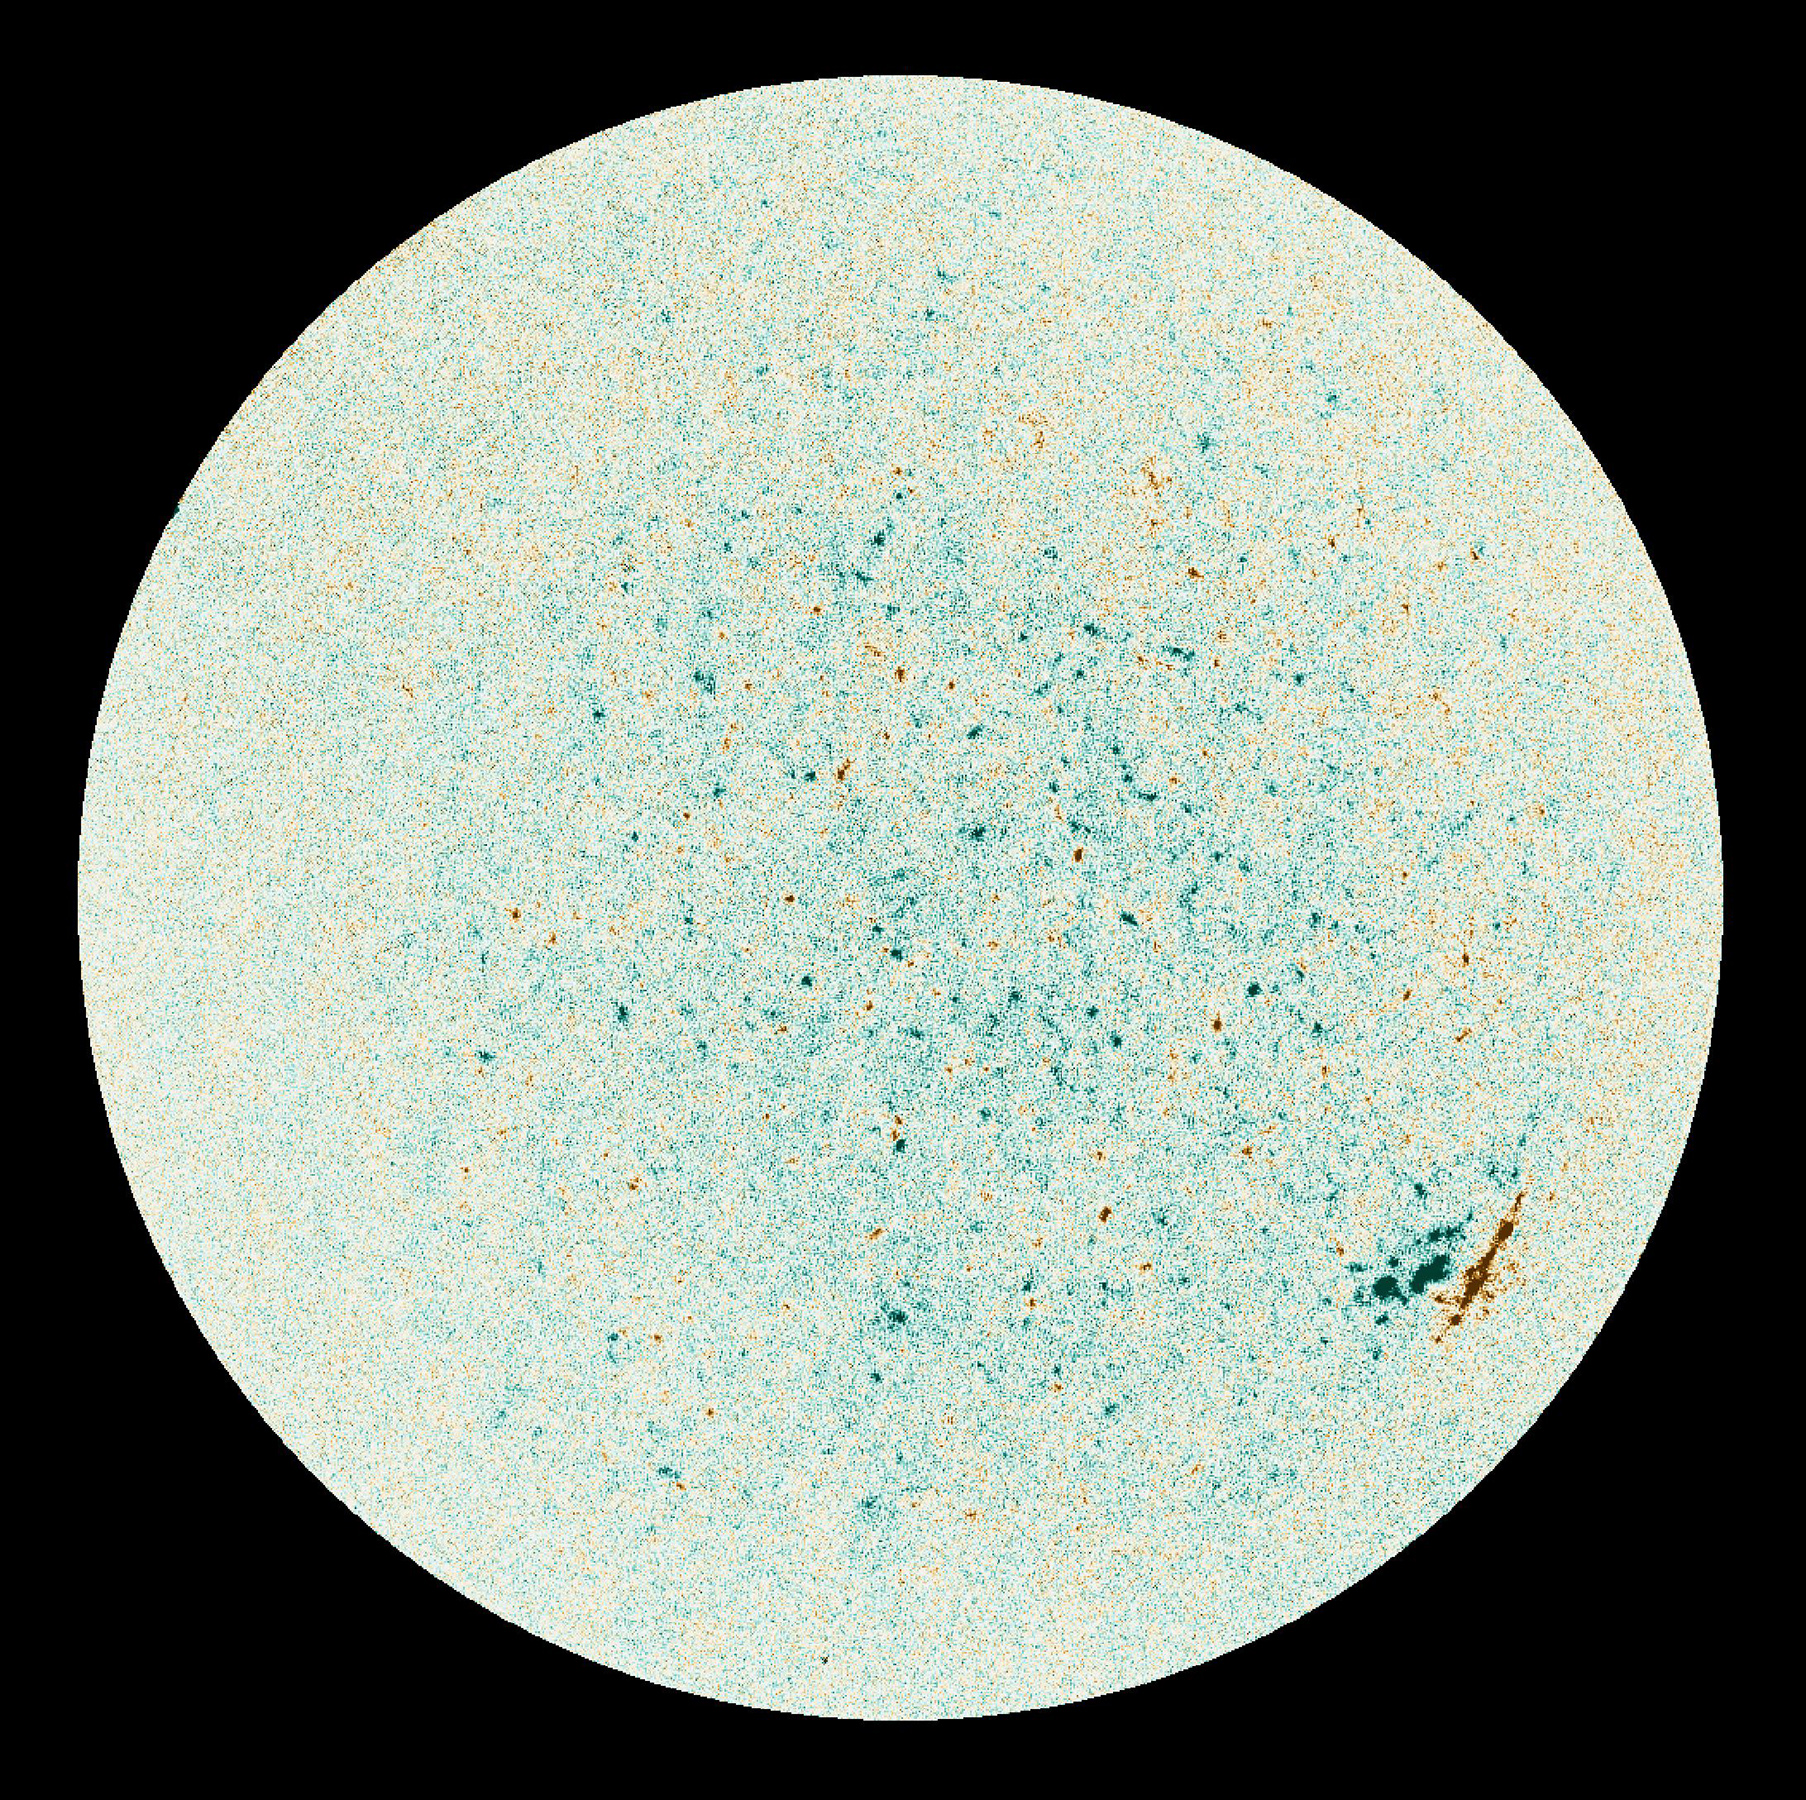 A map of magnetic properties for the whole Sun based on data from the Polarimetric and Helioseismic Imager (PHI) on NASA/ESA?s Solar Orbiter spacecraft taken on June 18, 2020 and released by ESA July 